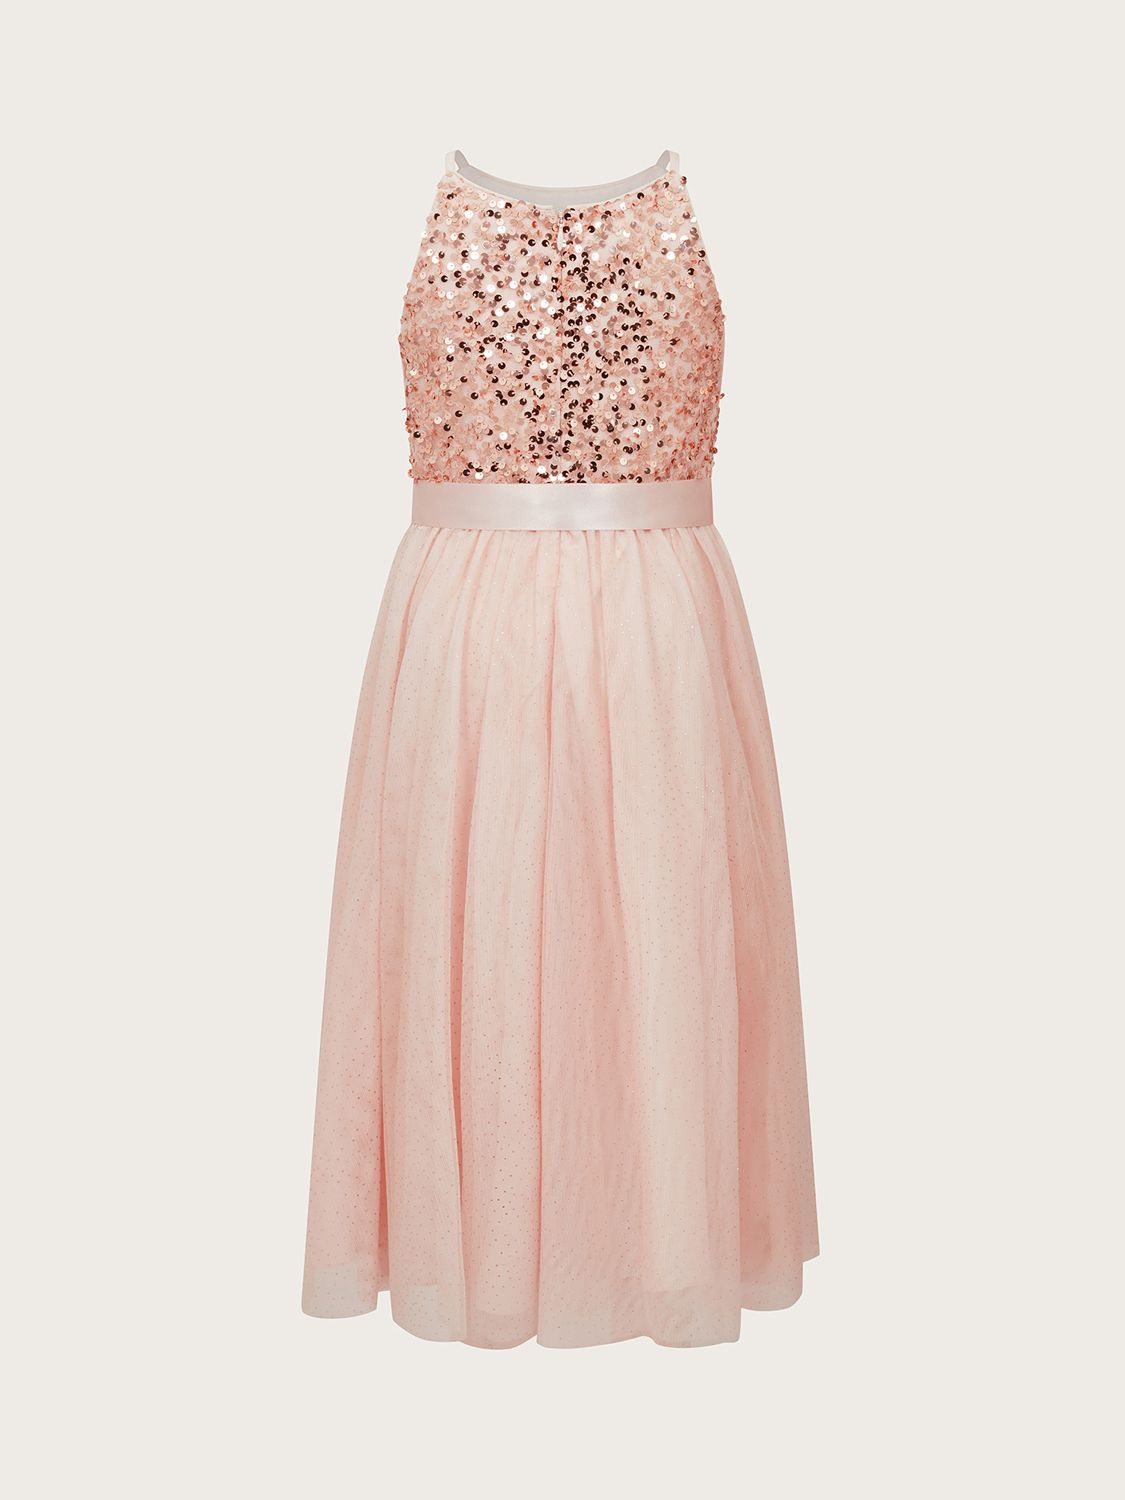 Monsoon Kids' Truth Sequin Party Dress, Rose Gold, 14-15 years